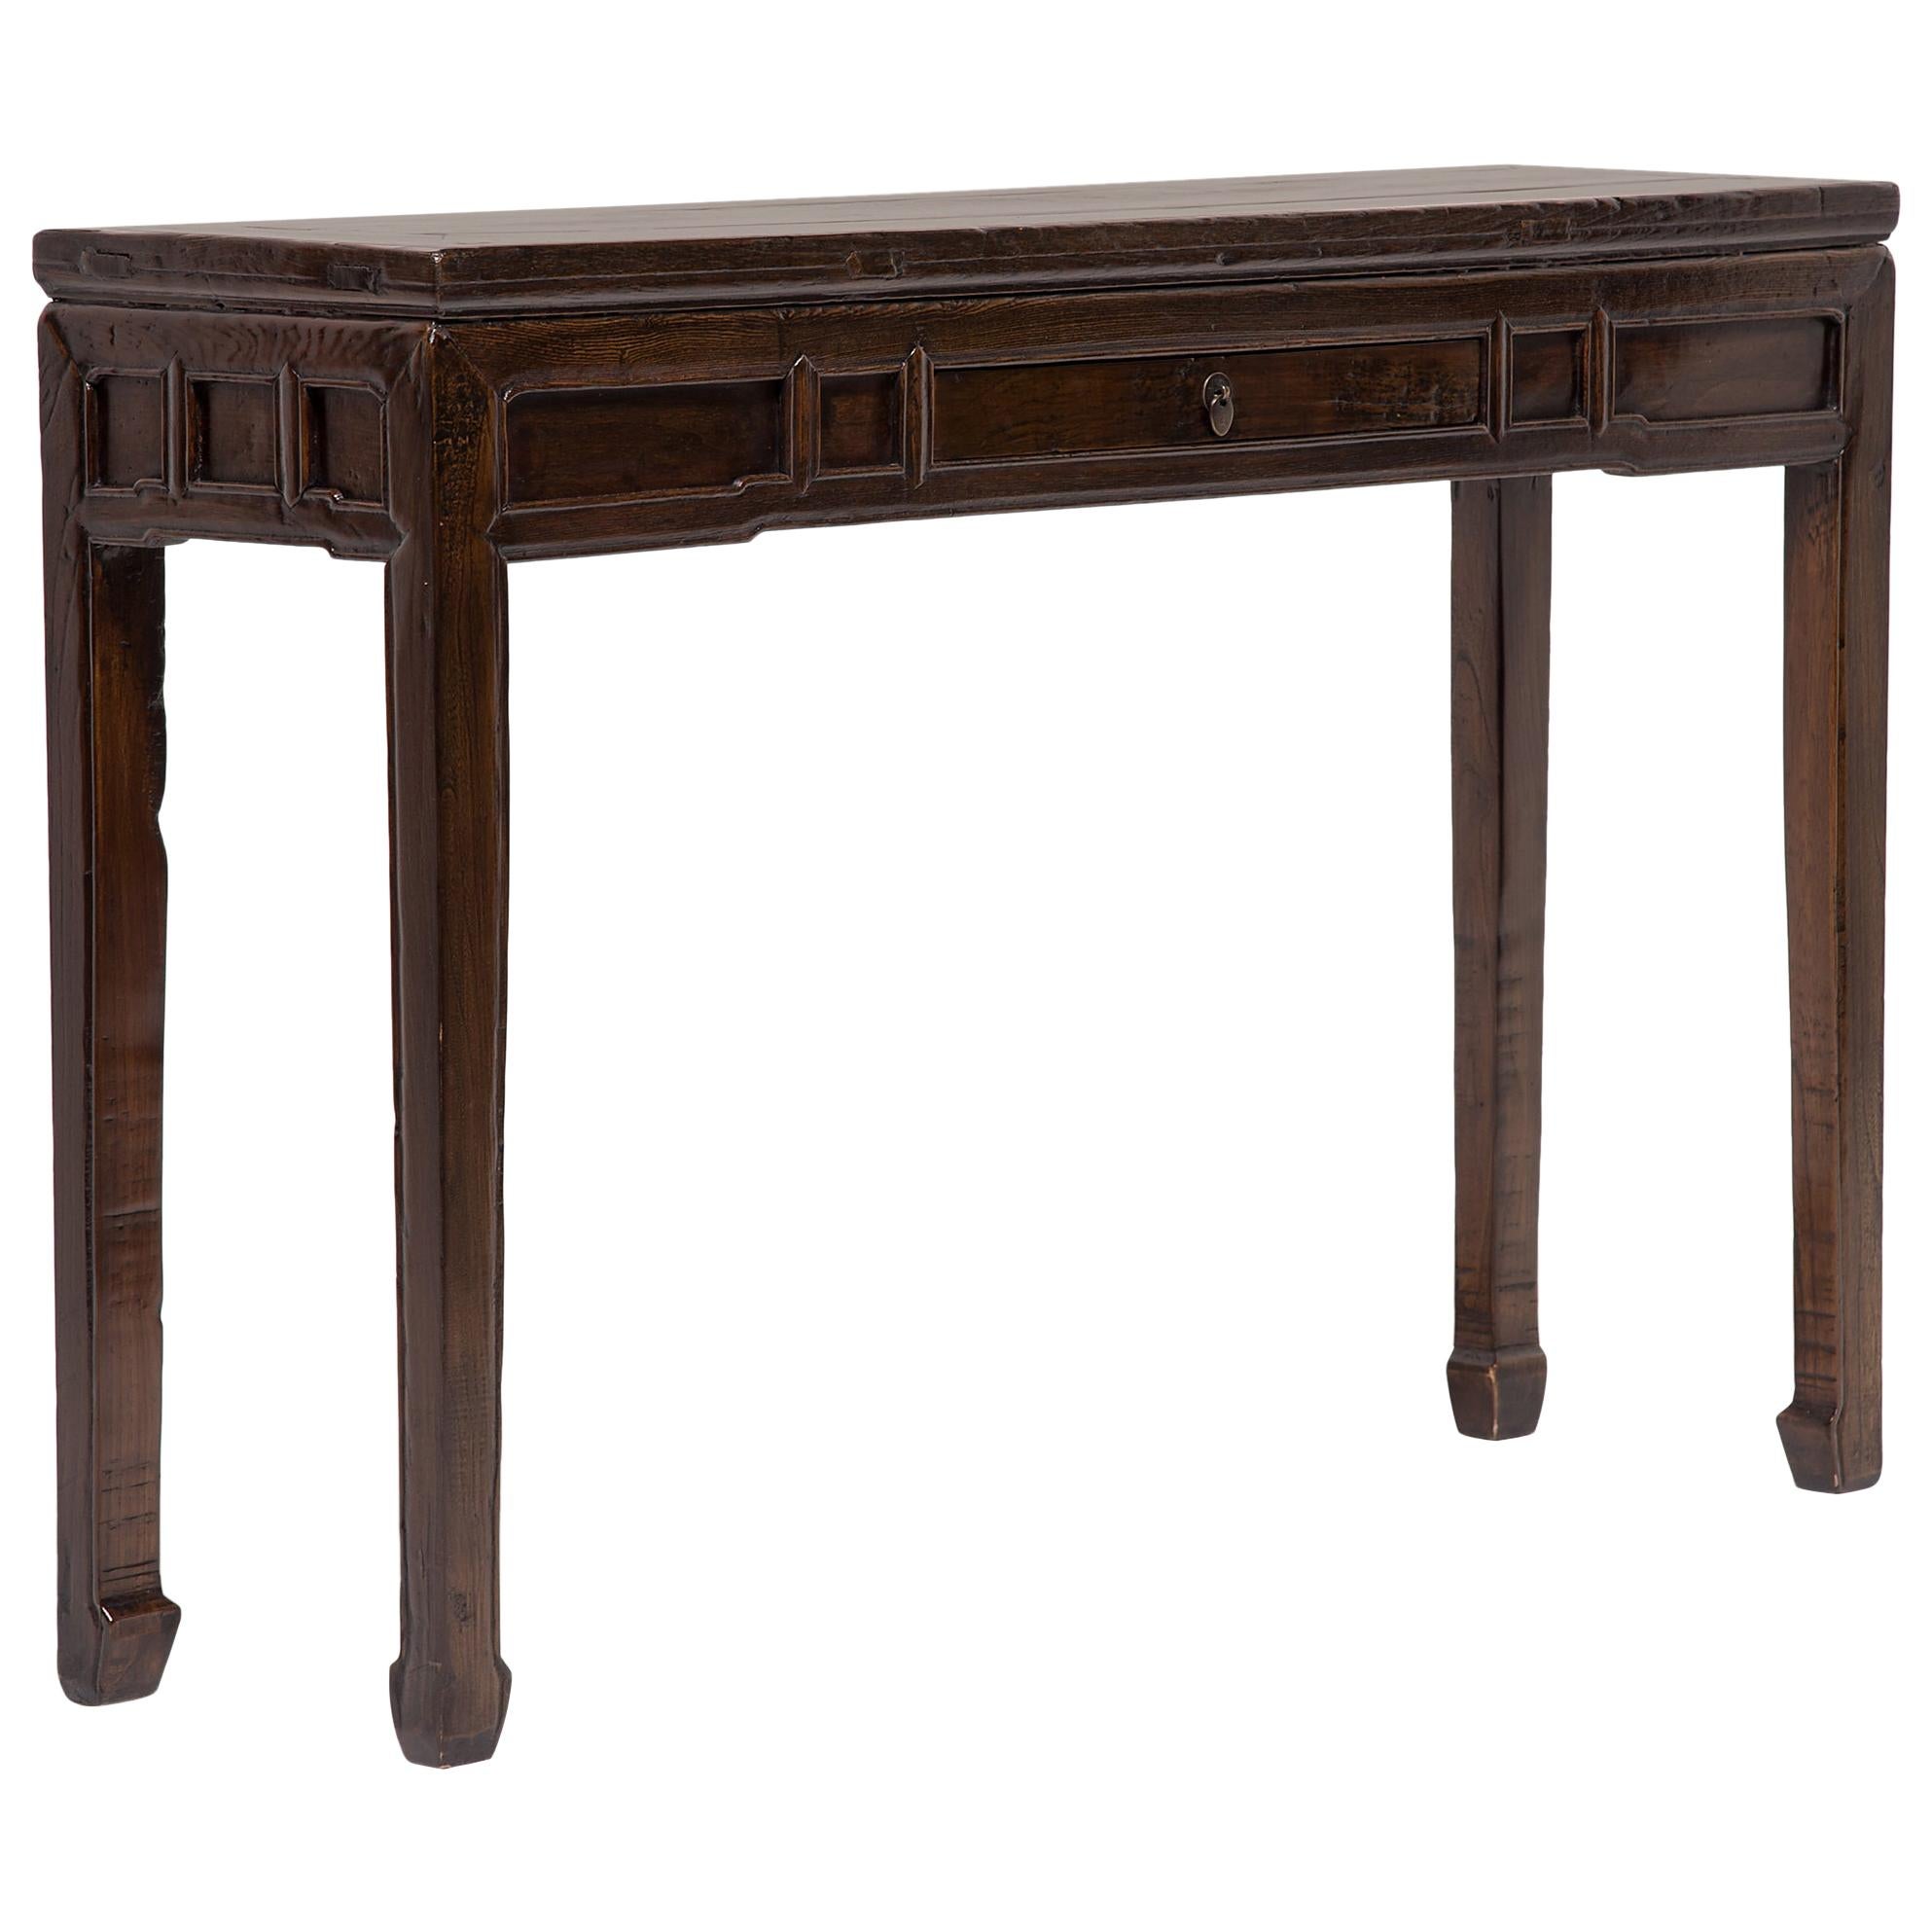 19th Century Chinese Shallow Altar Table